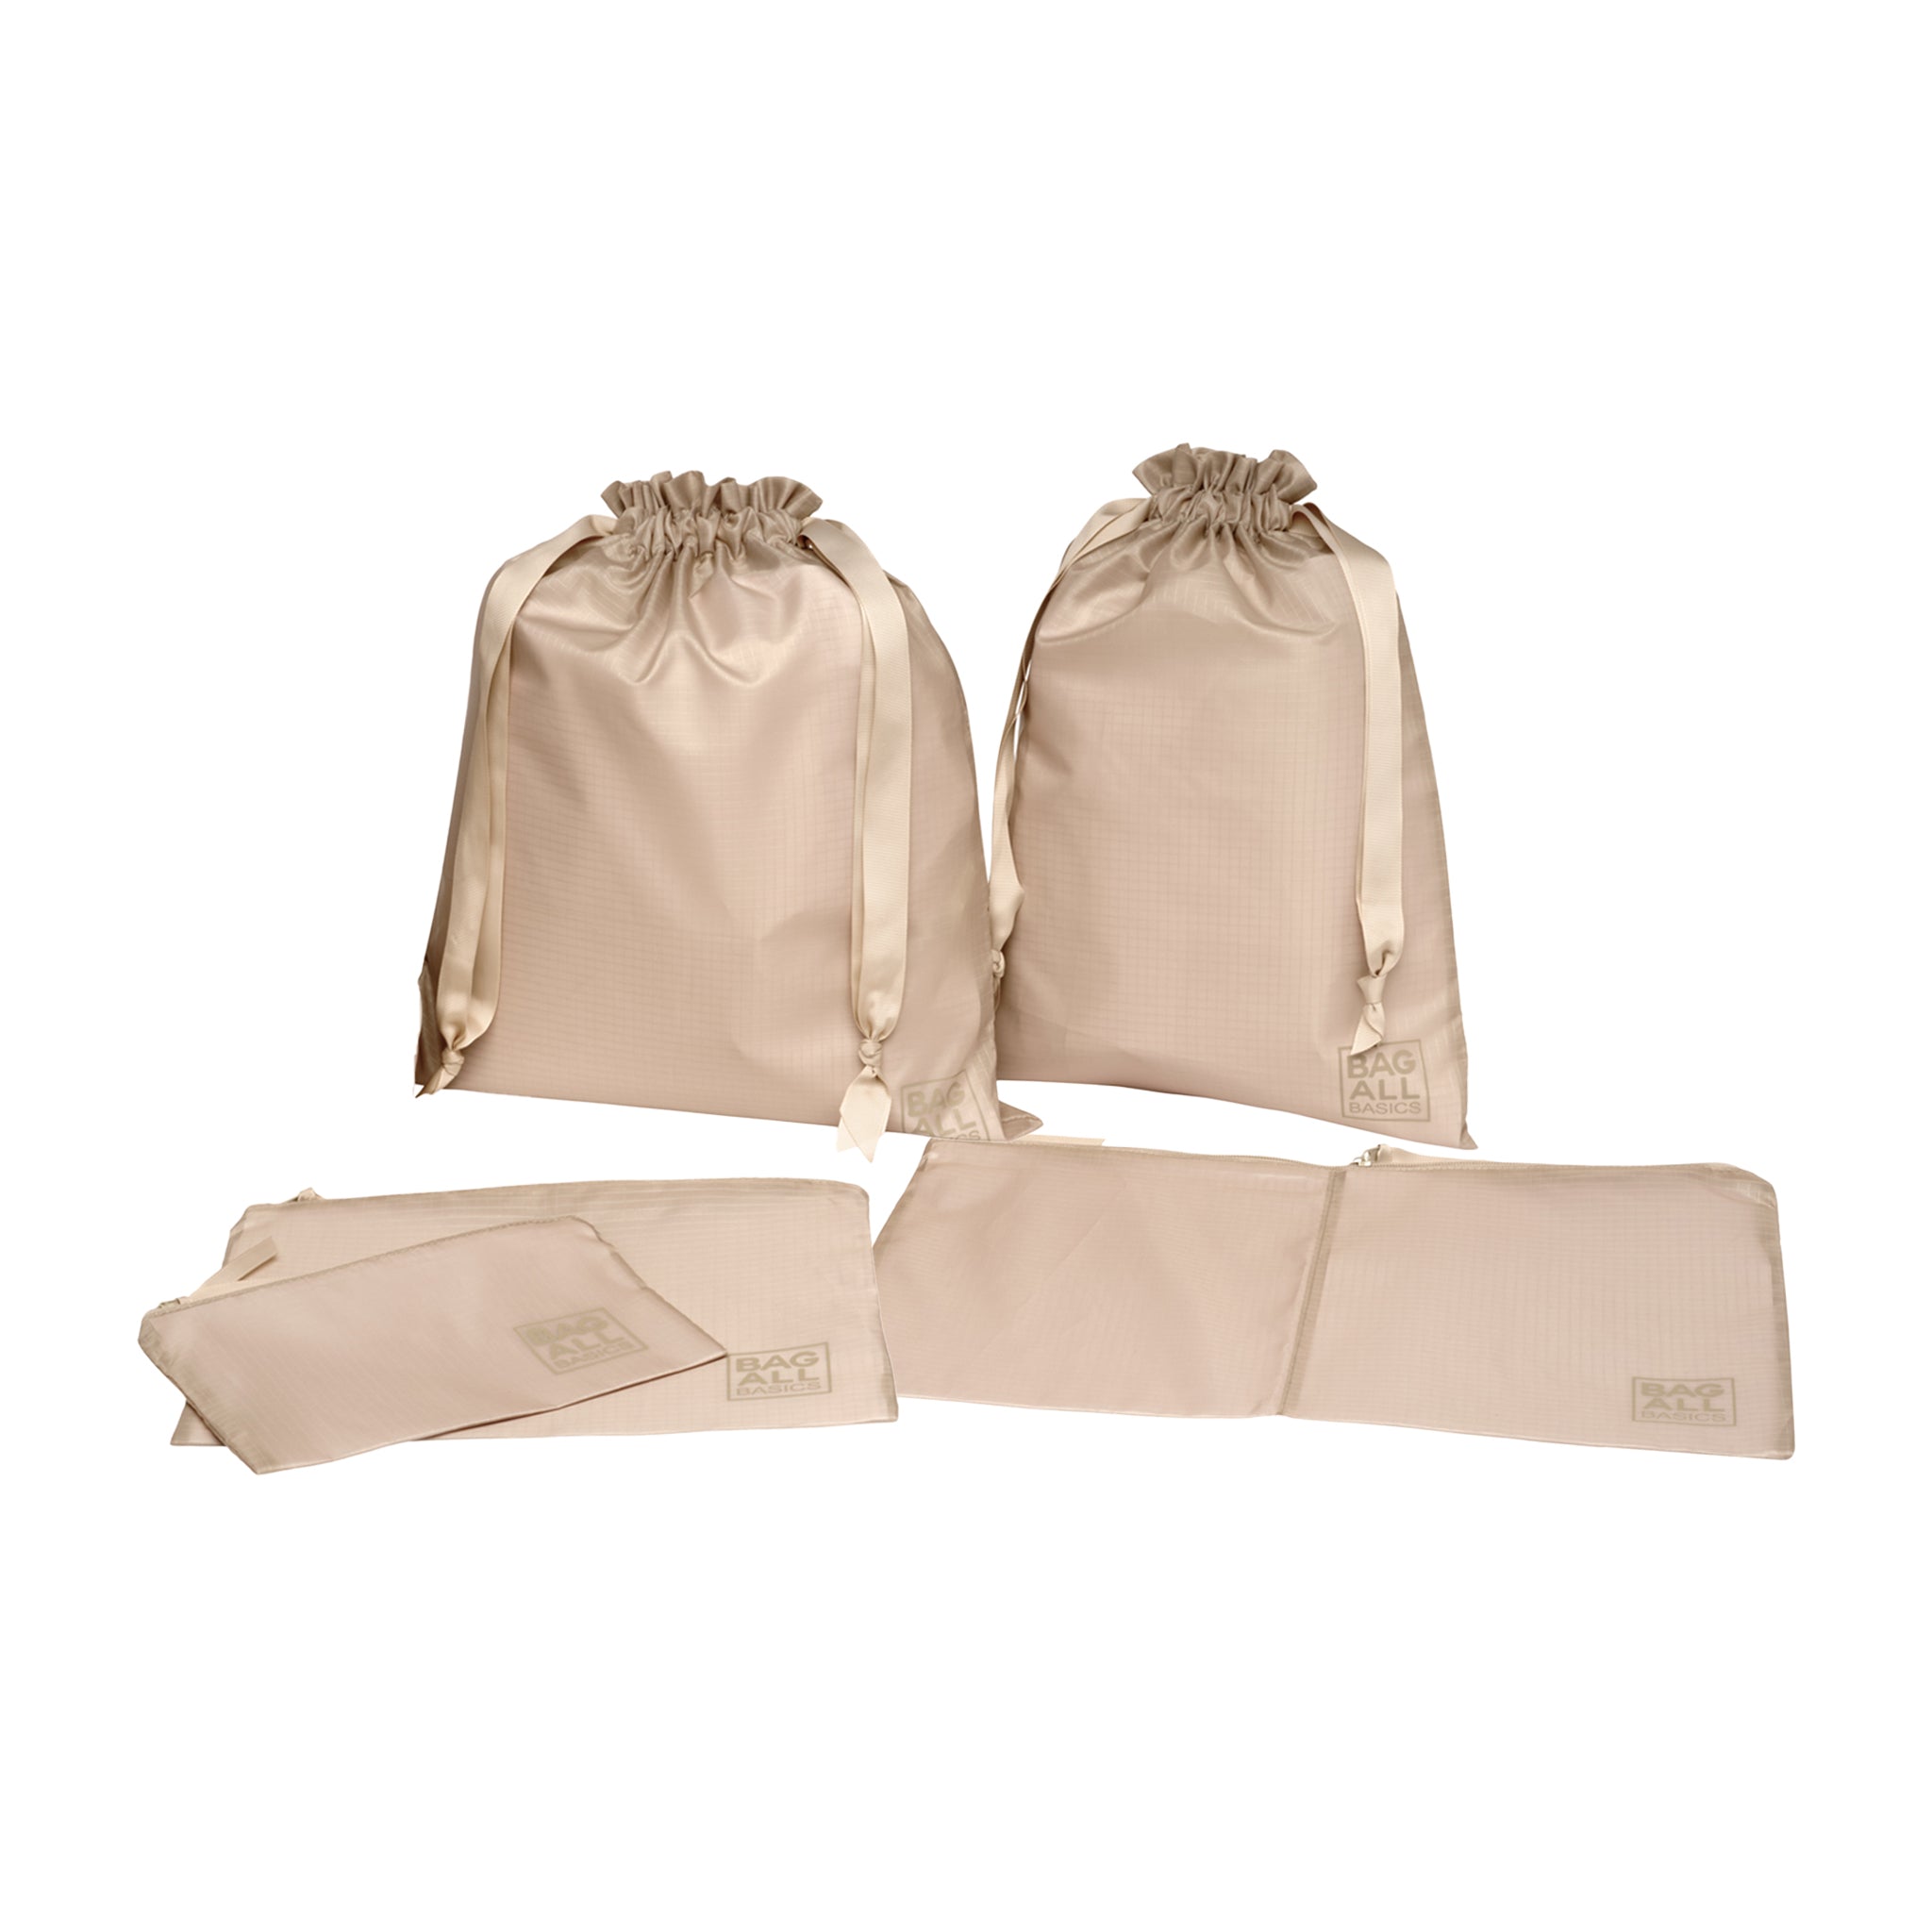 Bag-all Basic Packing Bags Set, 5-pack, Taupe